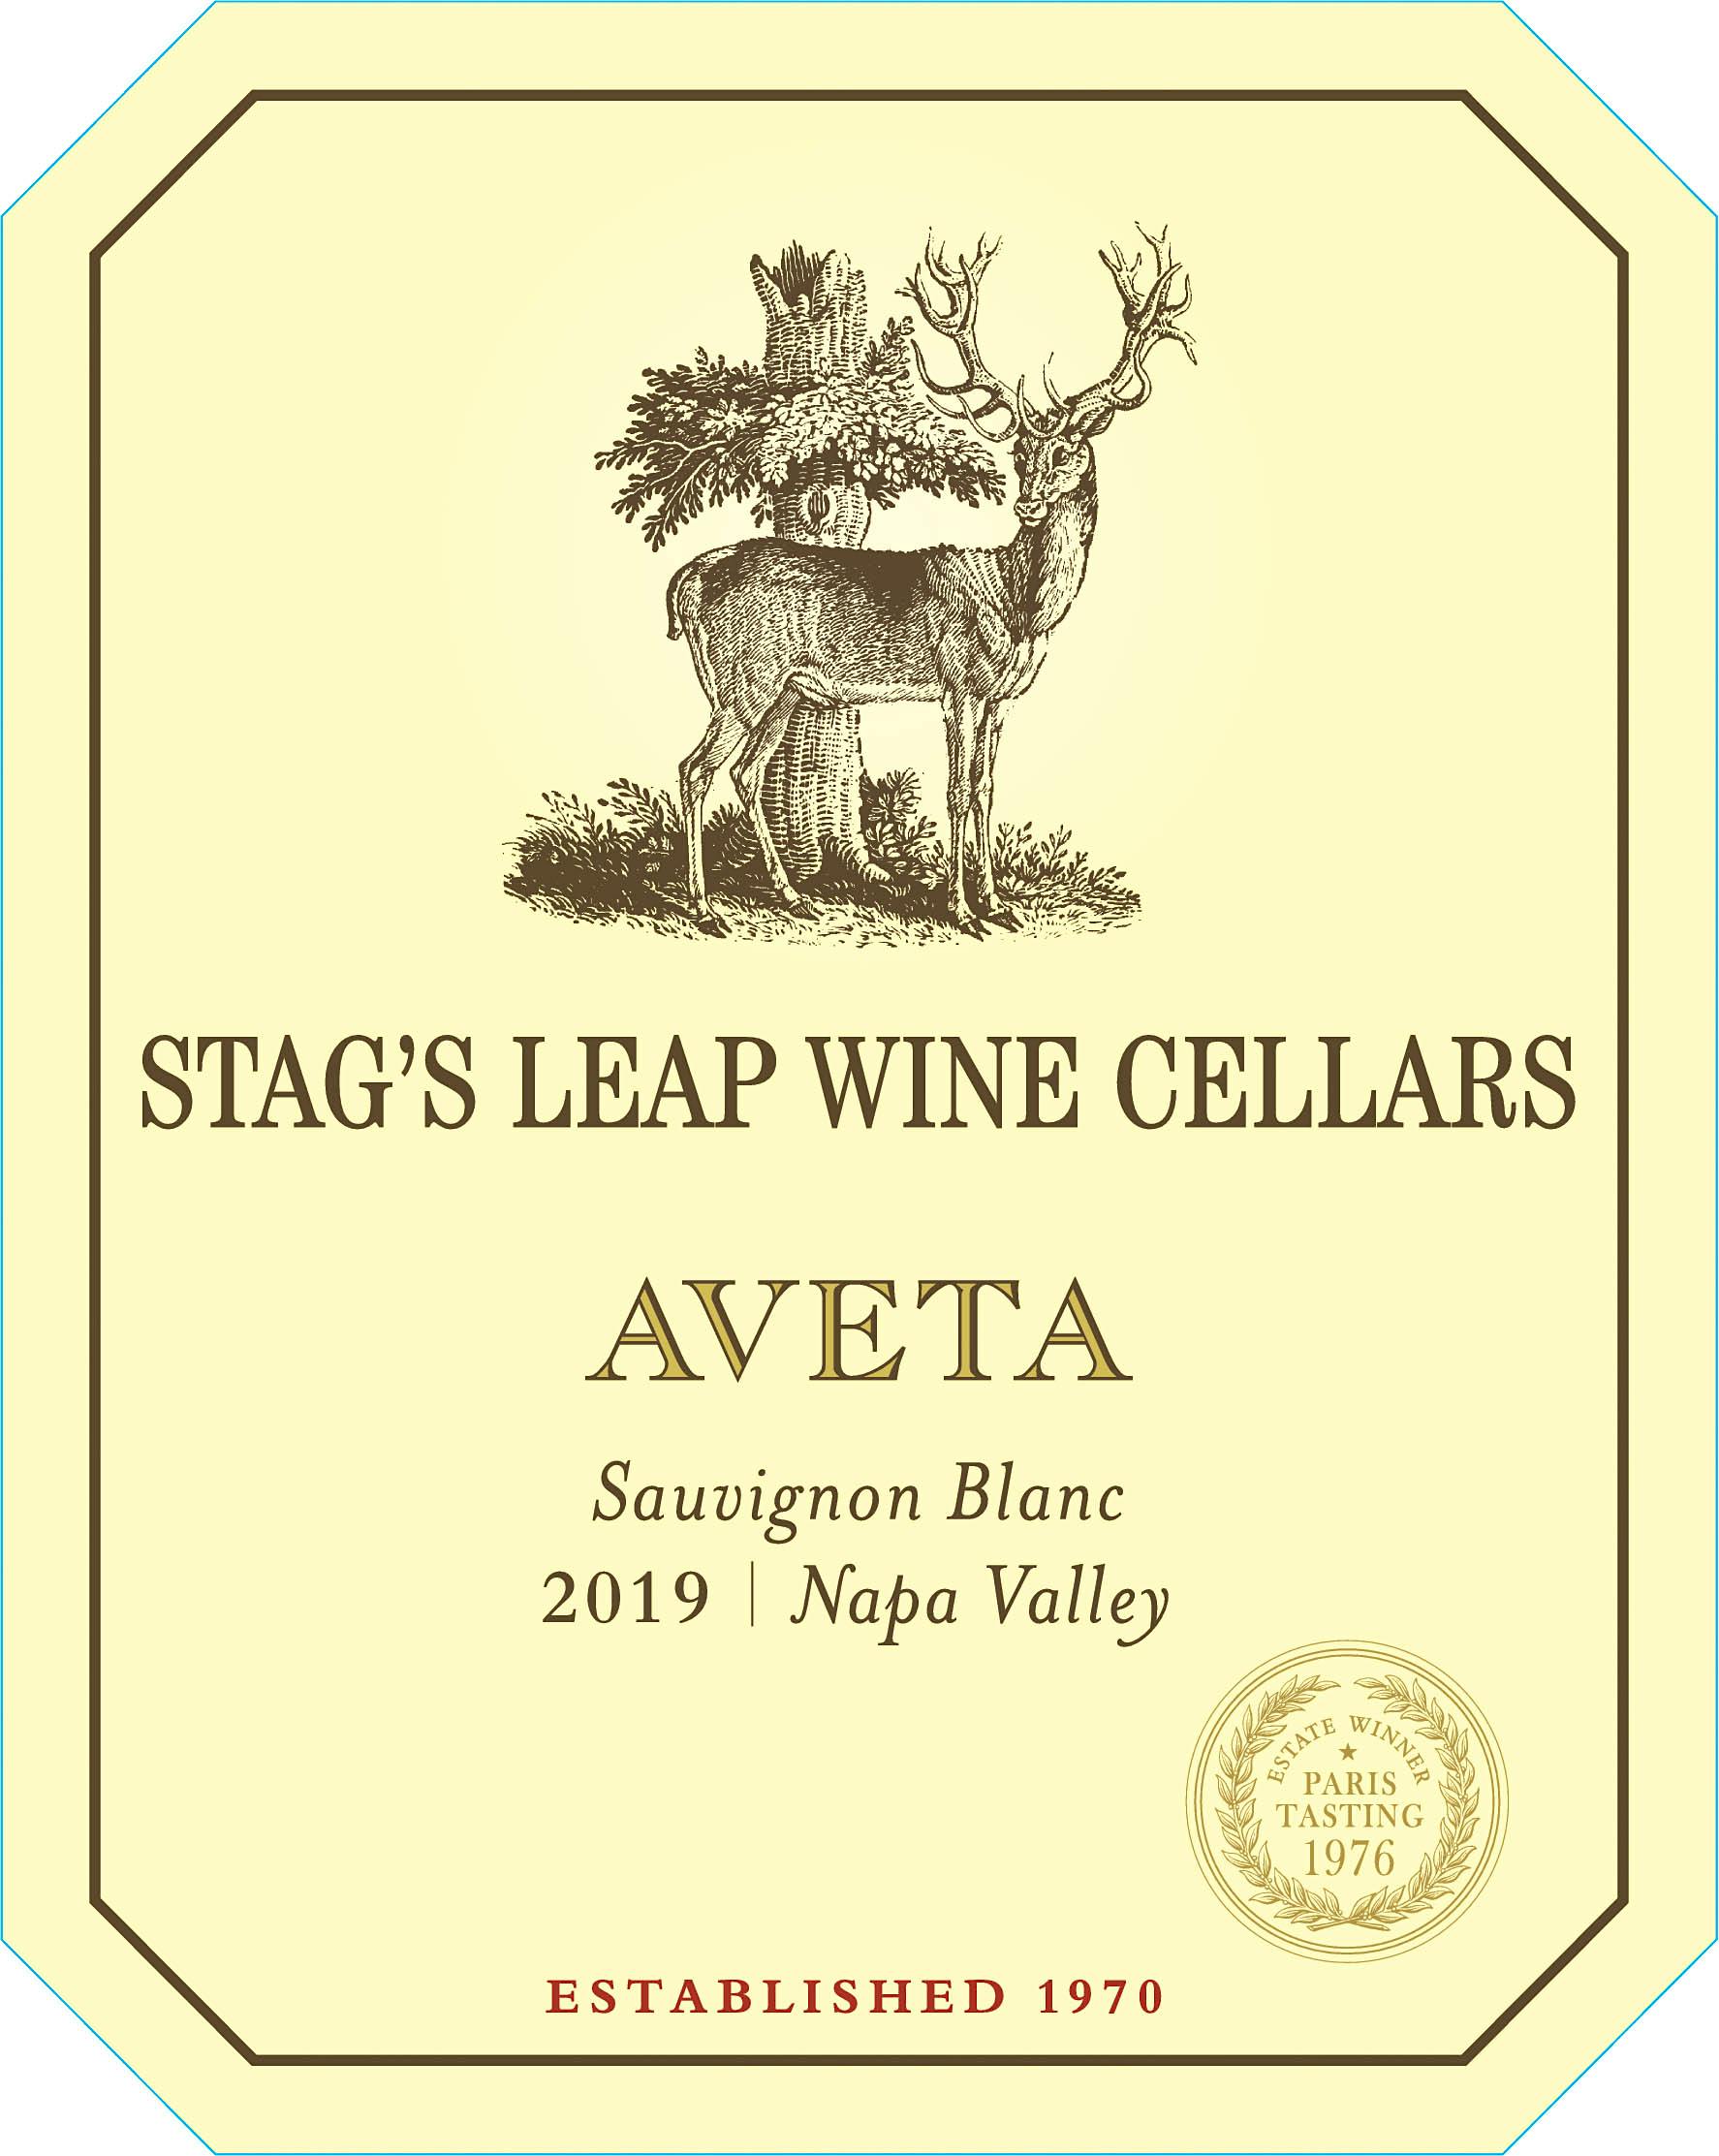 Label for Stag's Leap Wine Cellars